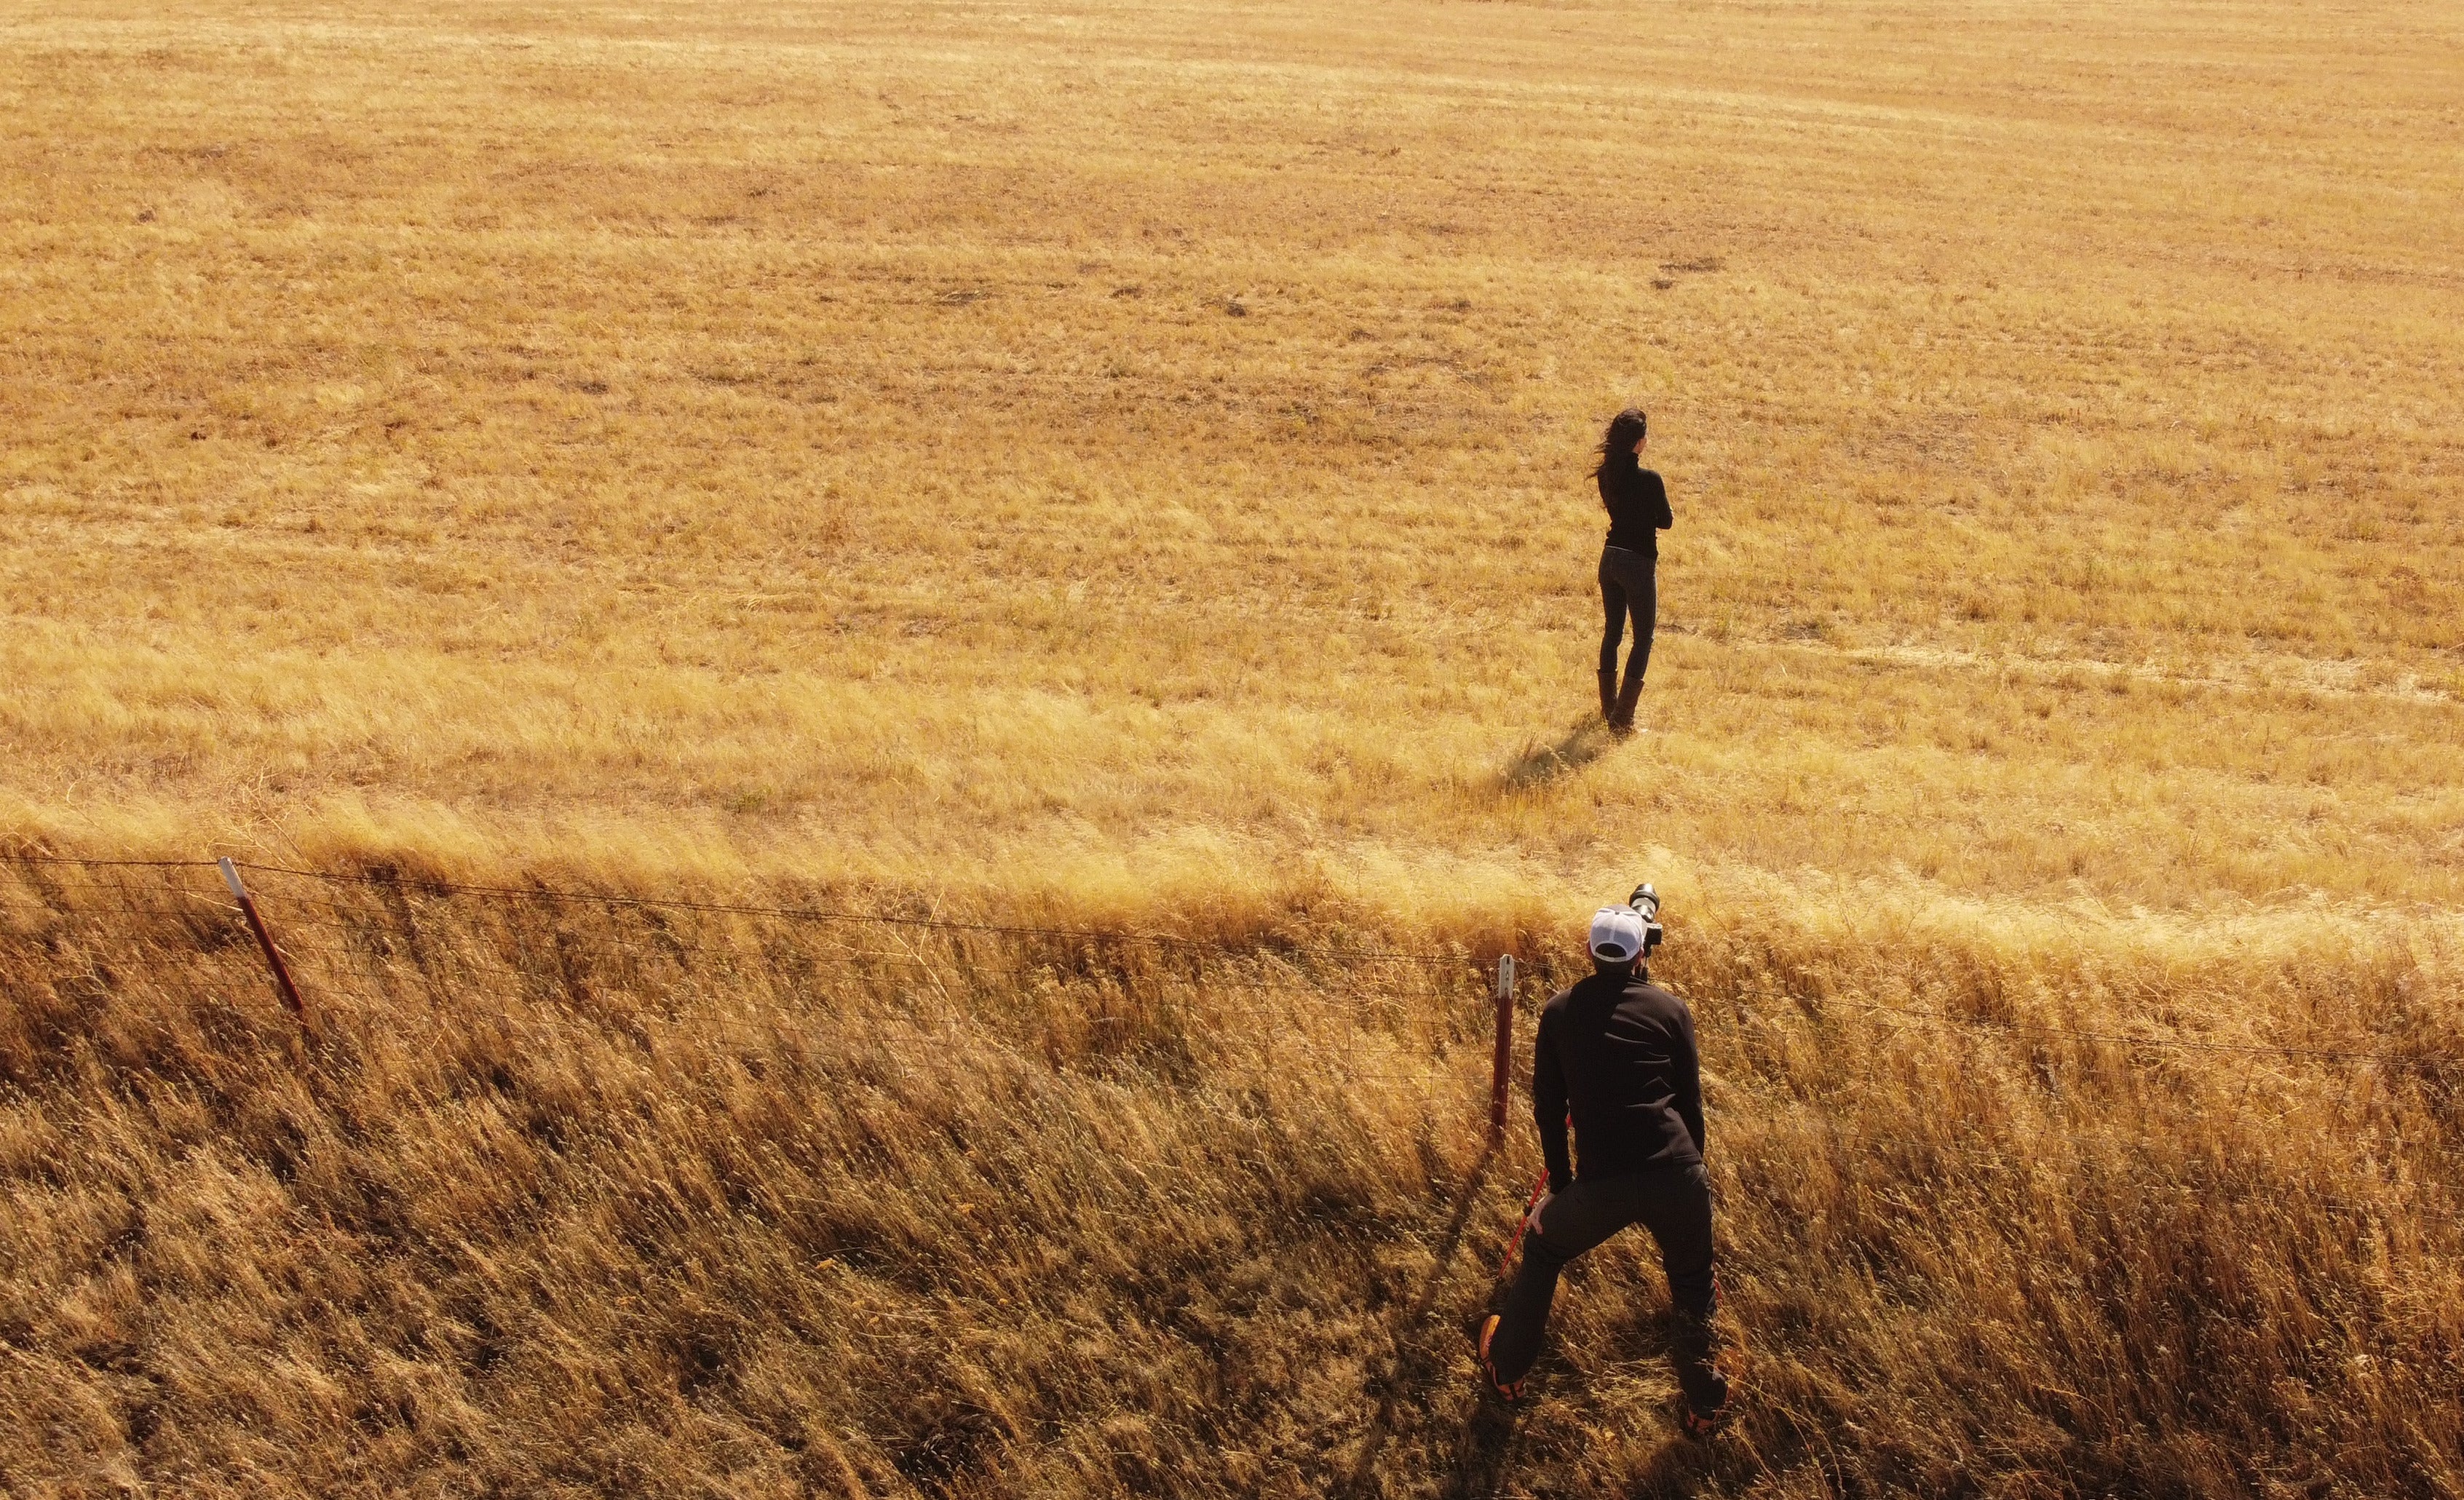 photoshoot in a wheat field